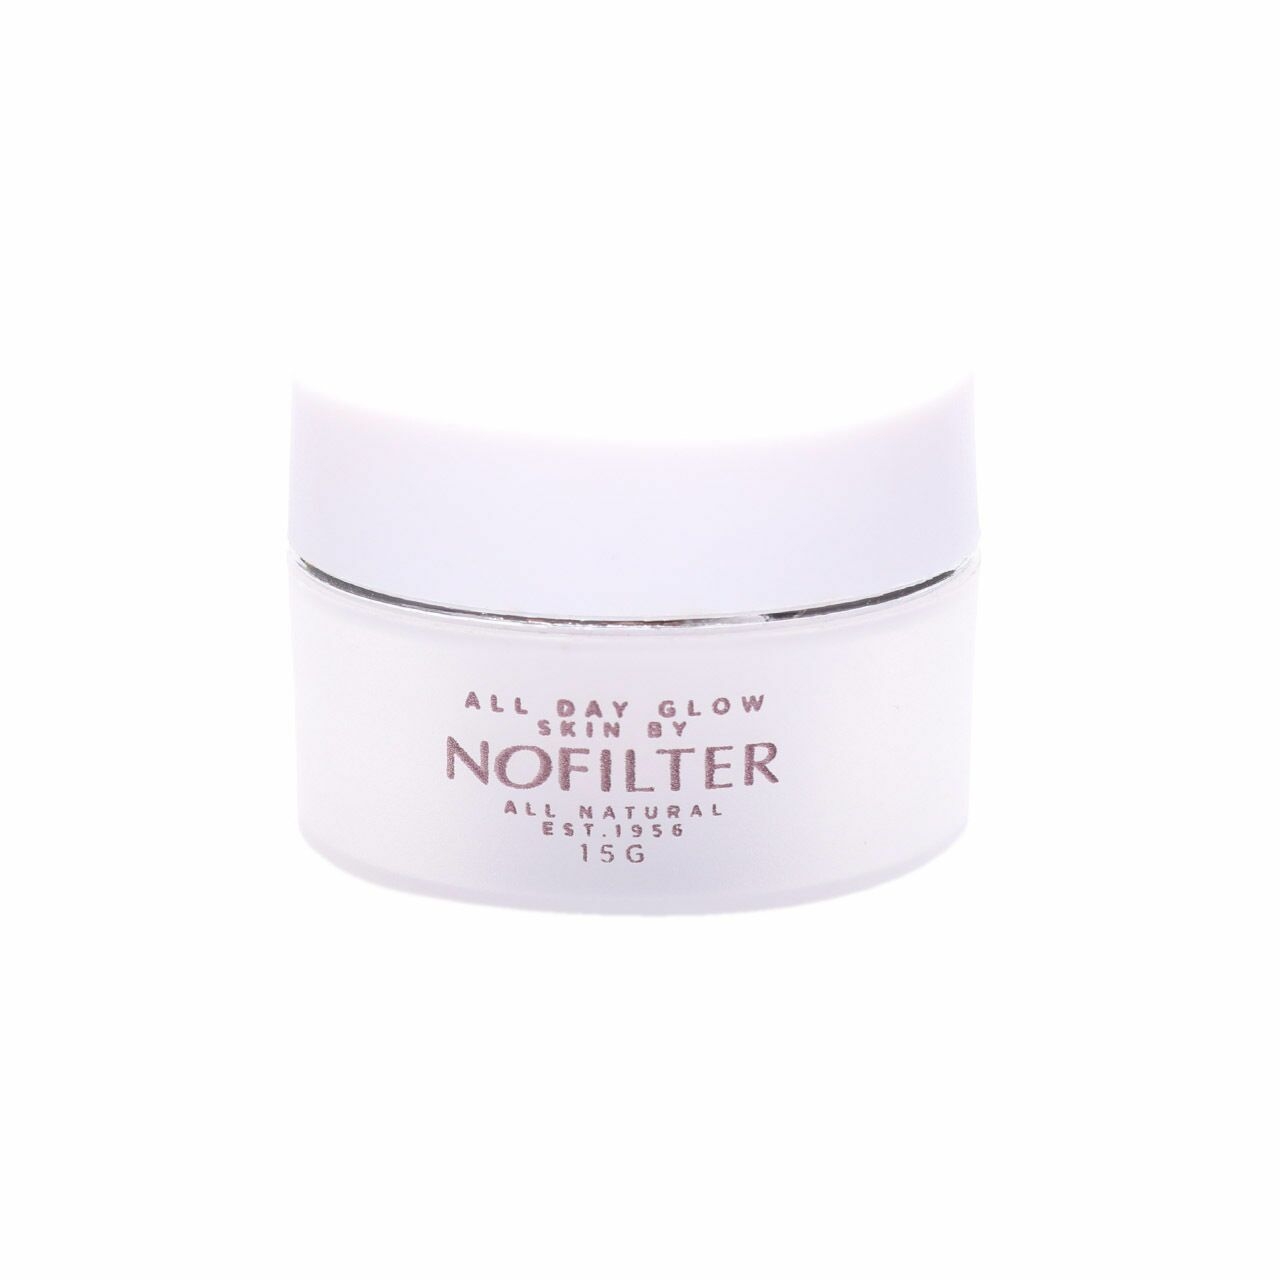 Skin by NOFILTER All Day Glow Moisturizer Skin Care